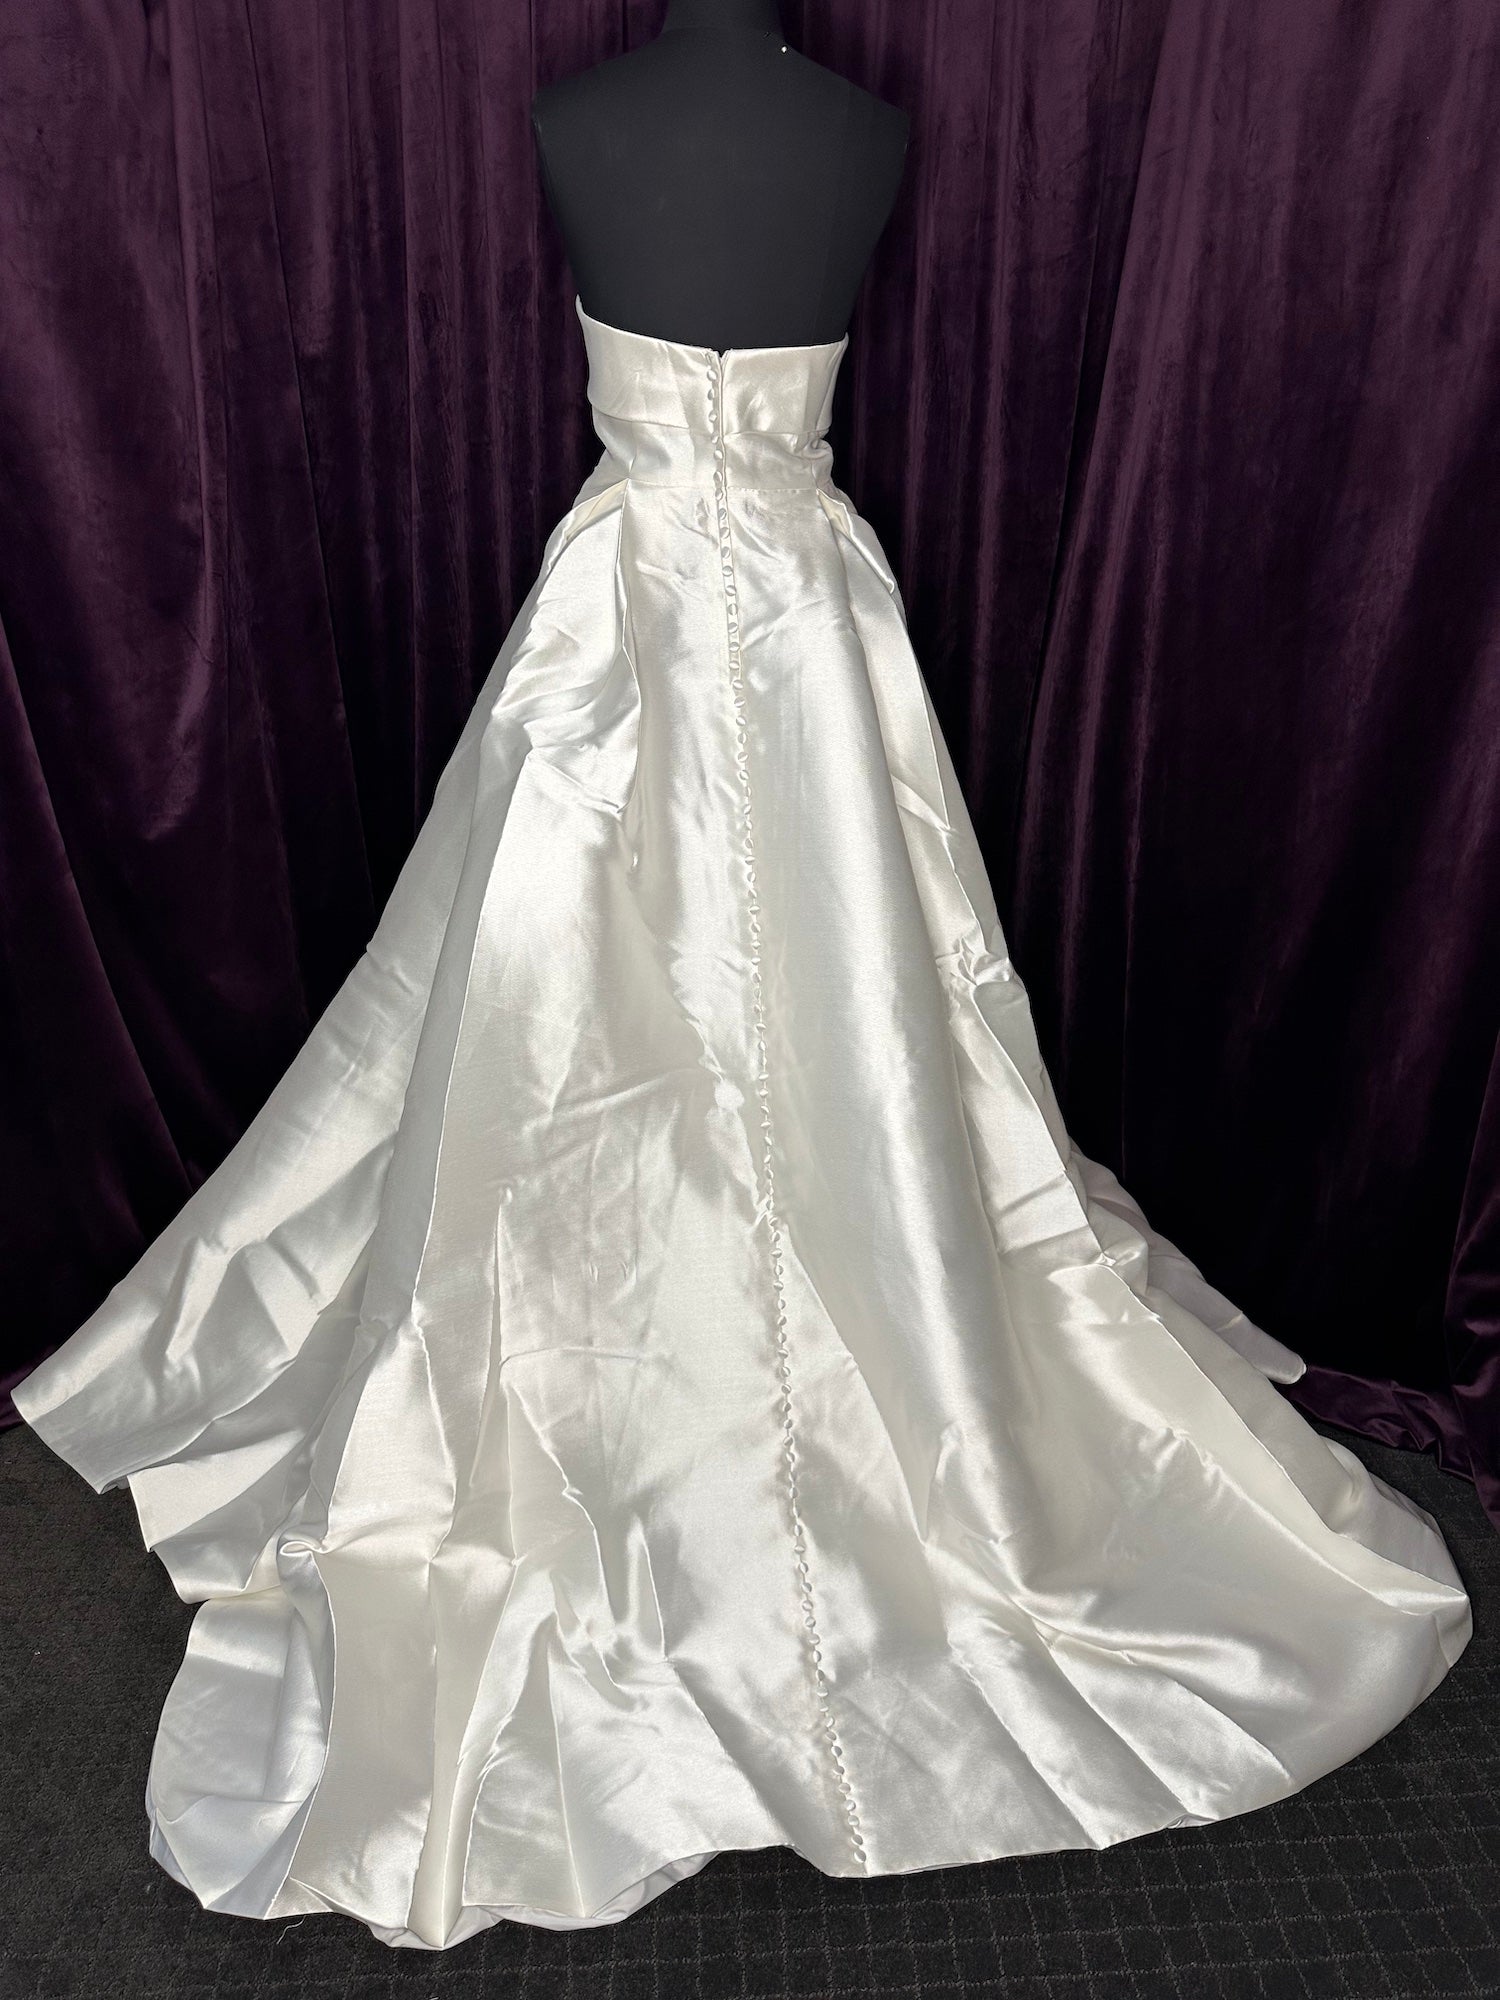 *NEW* Designer Wedding Gown Mikado Strapless Box Pleat Skirt with Buttons - #1273T